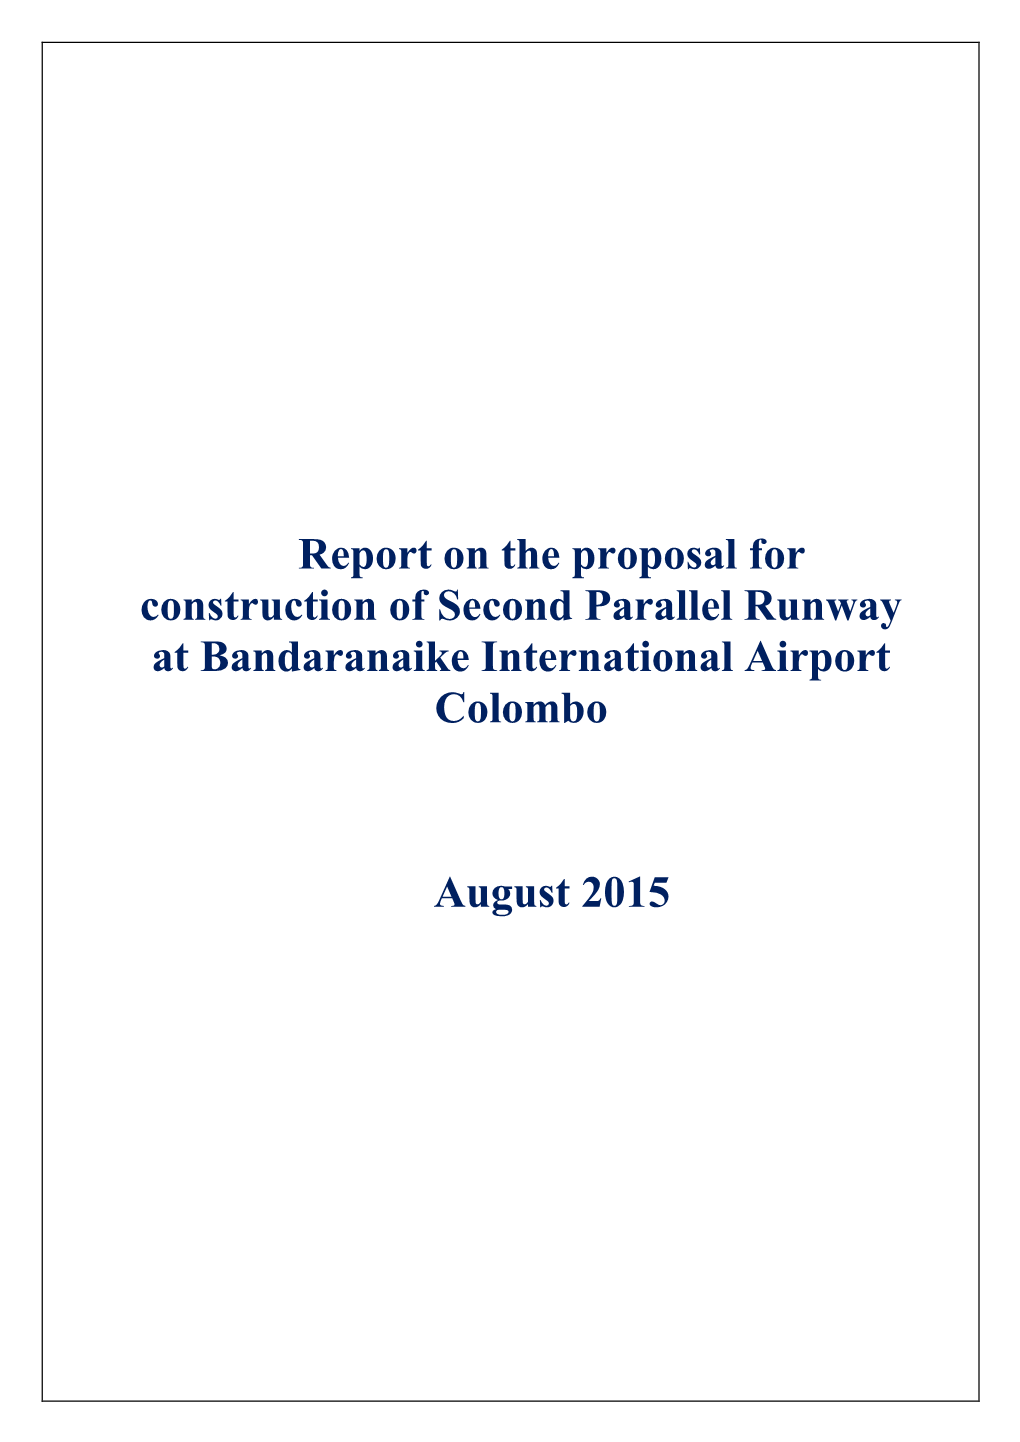 Report on the Proposal for Construction of Second Parallel Runway at Bandaranaike International Airport Colombo August 2015